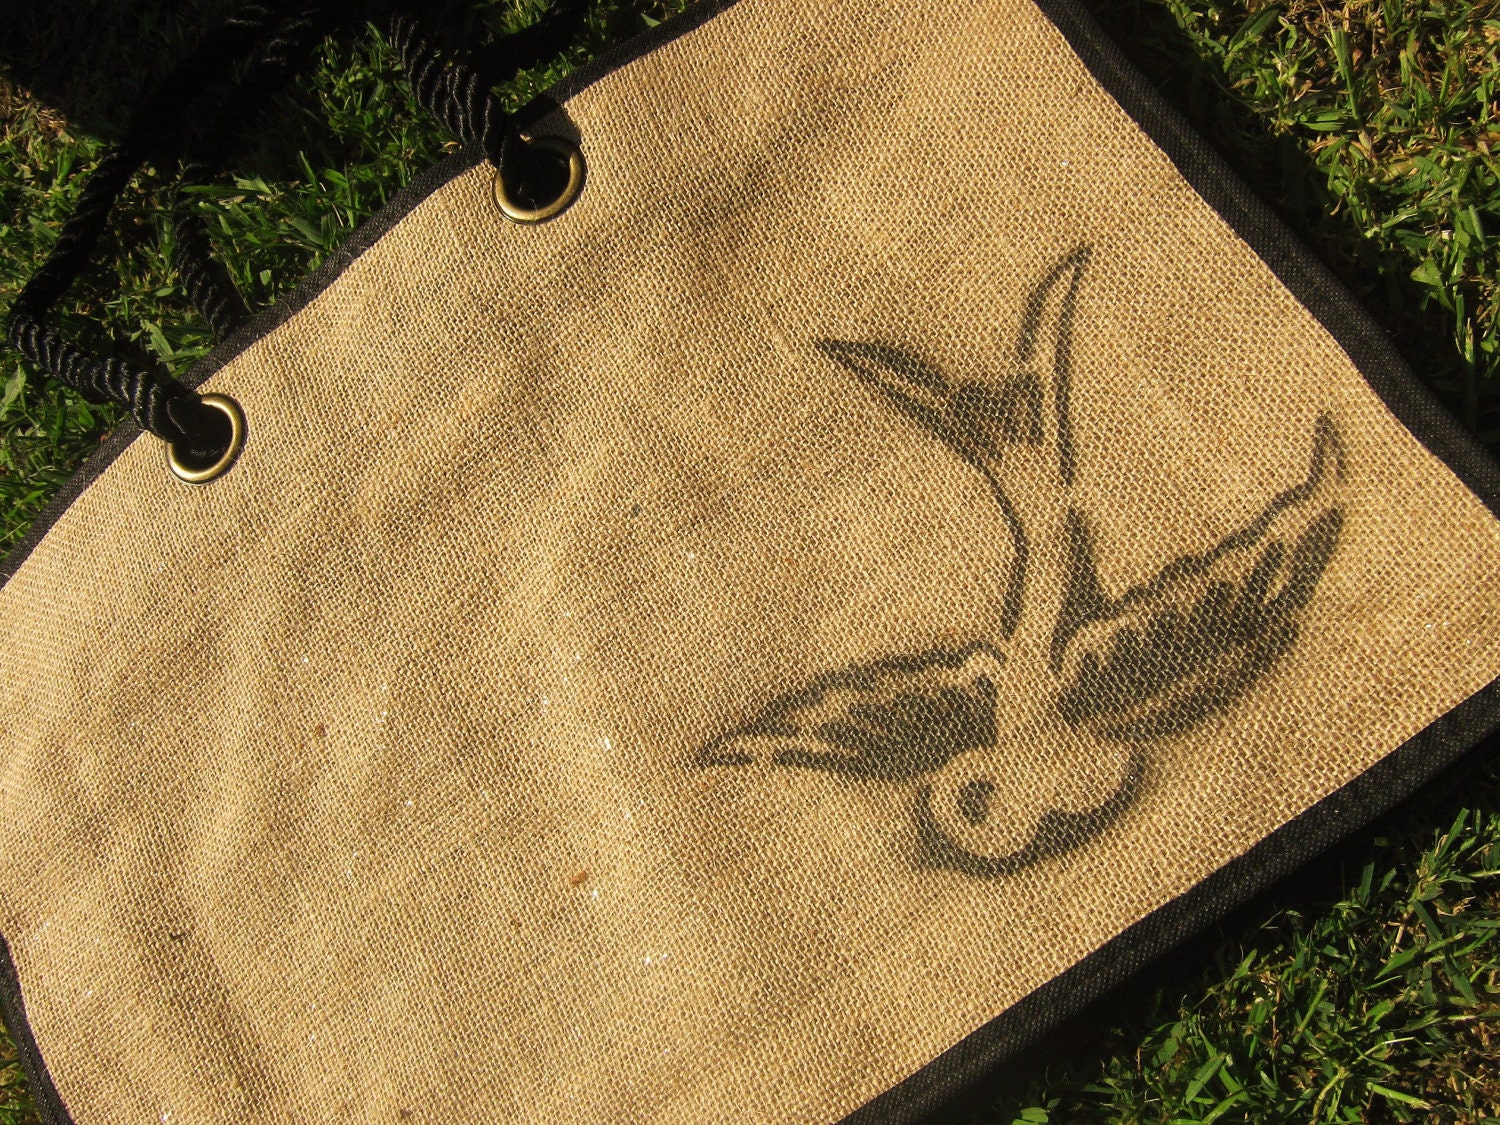 Reusable Burlap Beach Bag Tote Bag or Grocery Bag with stenciled Swallow